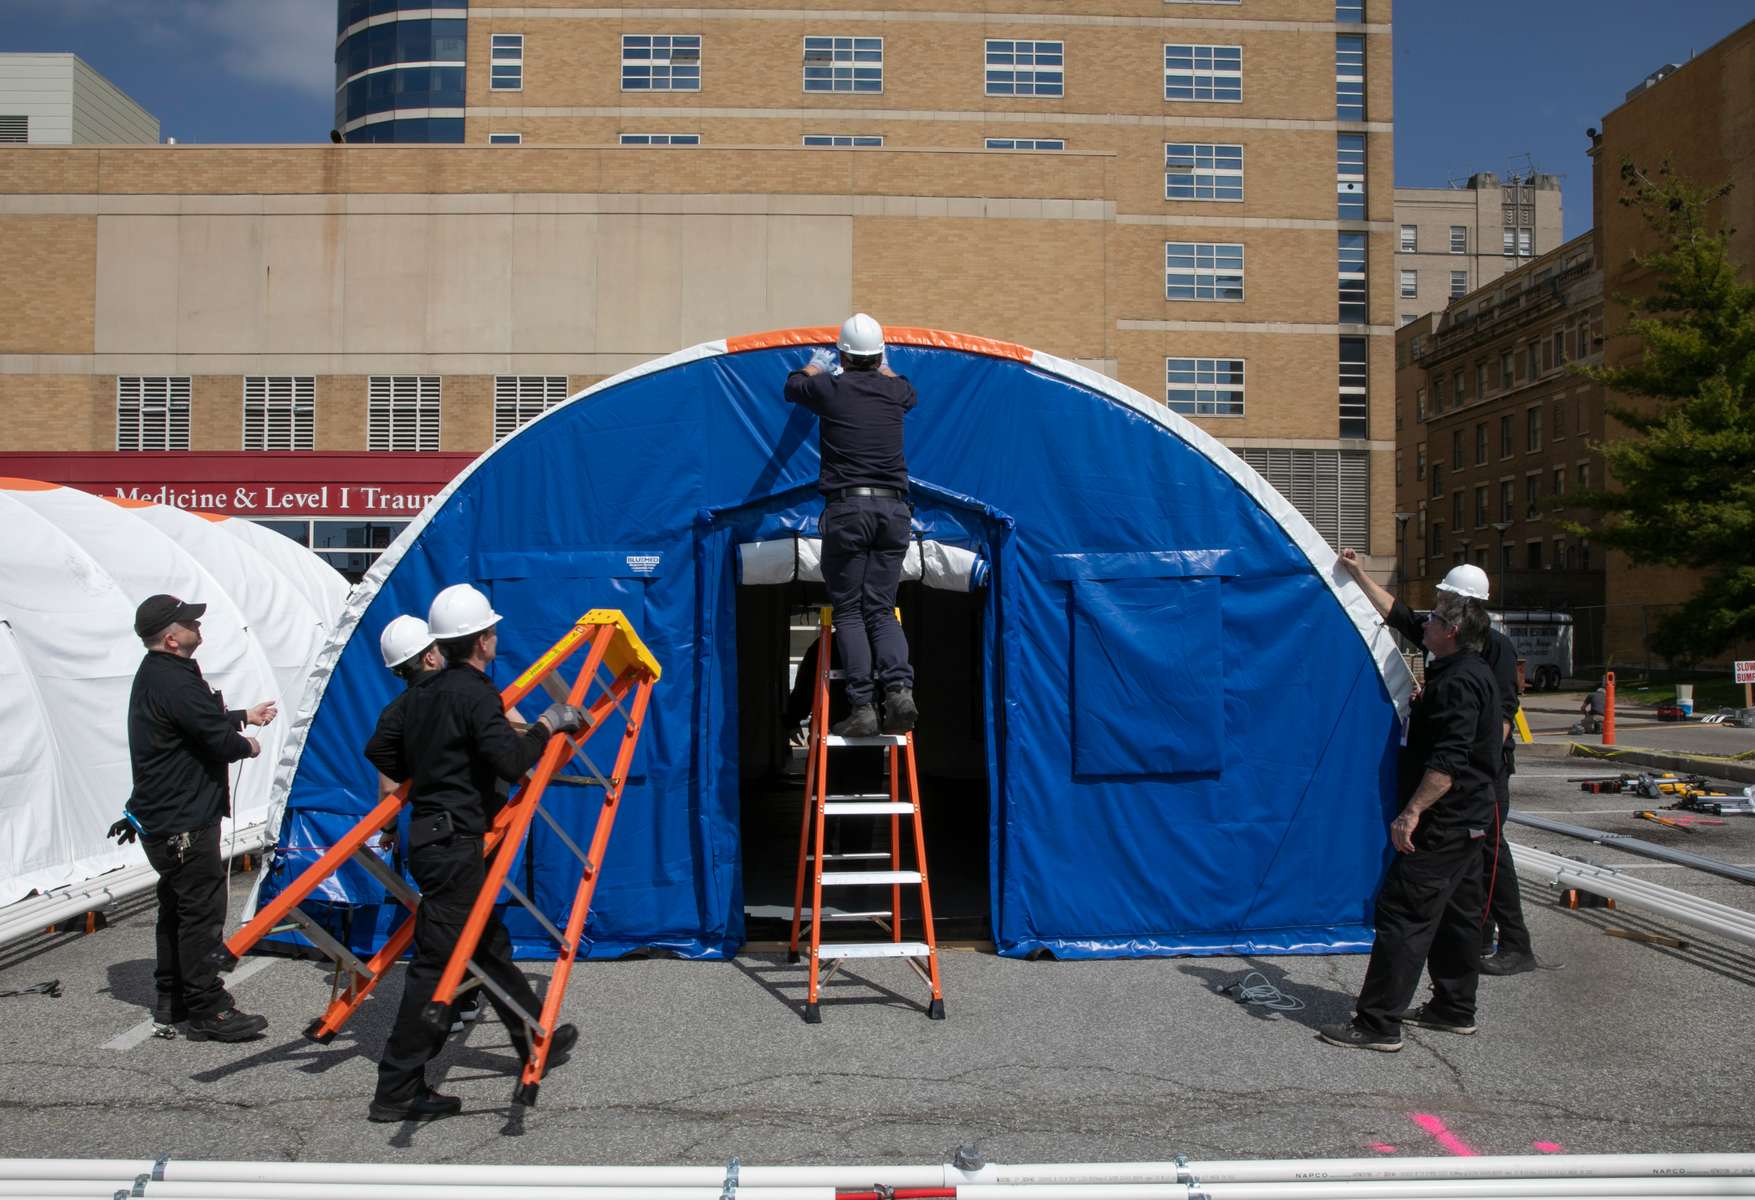 April 06, 2020. COVID Coverage. Medical tents are erected outside IU Health Methodist Hospital Emergency Department Monday April 6, 2020. The tents are equipped with negative airflow, water, power, and can hold 10 patients each. 